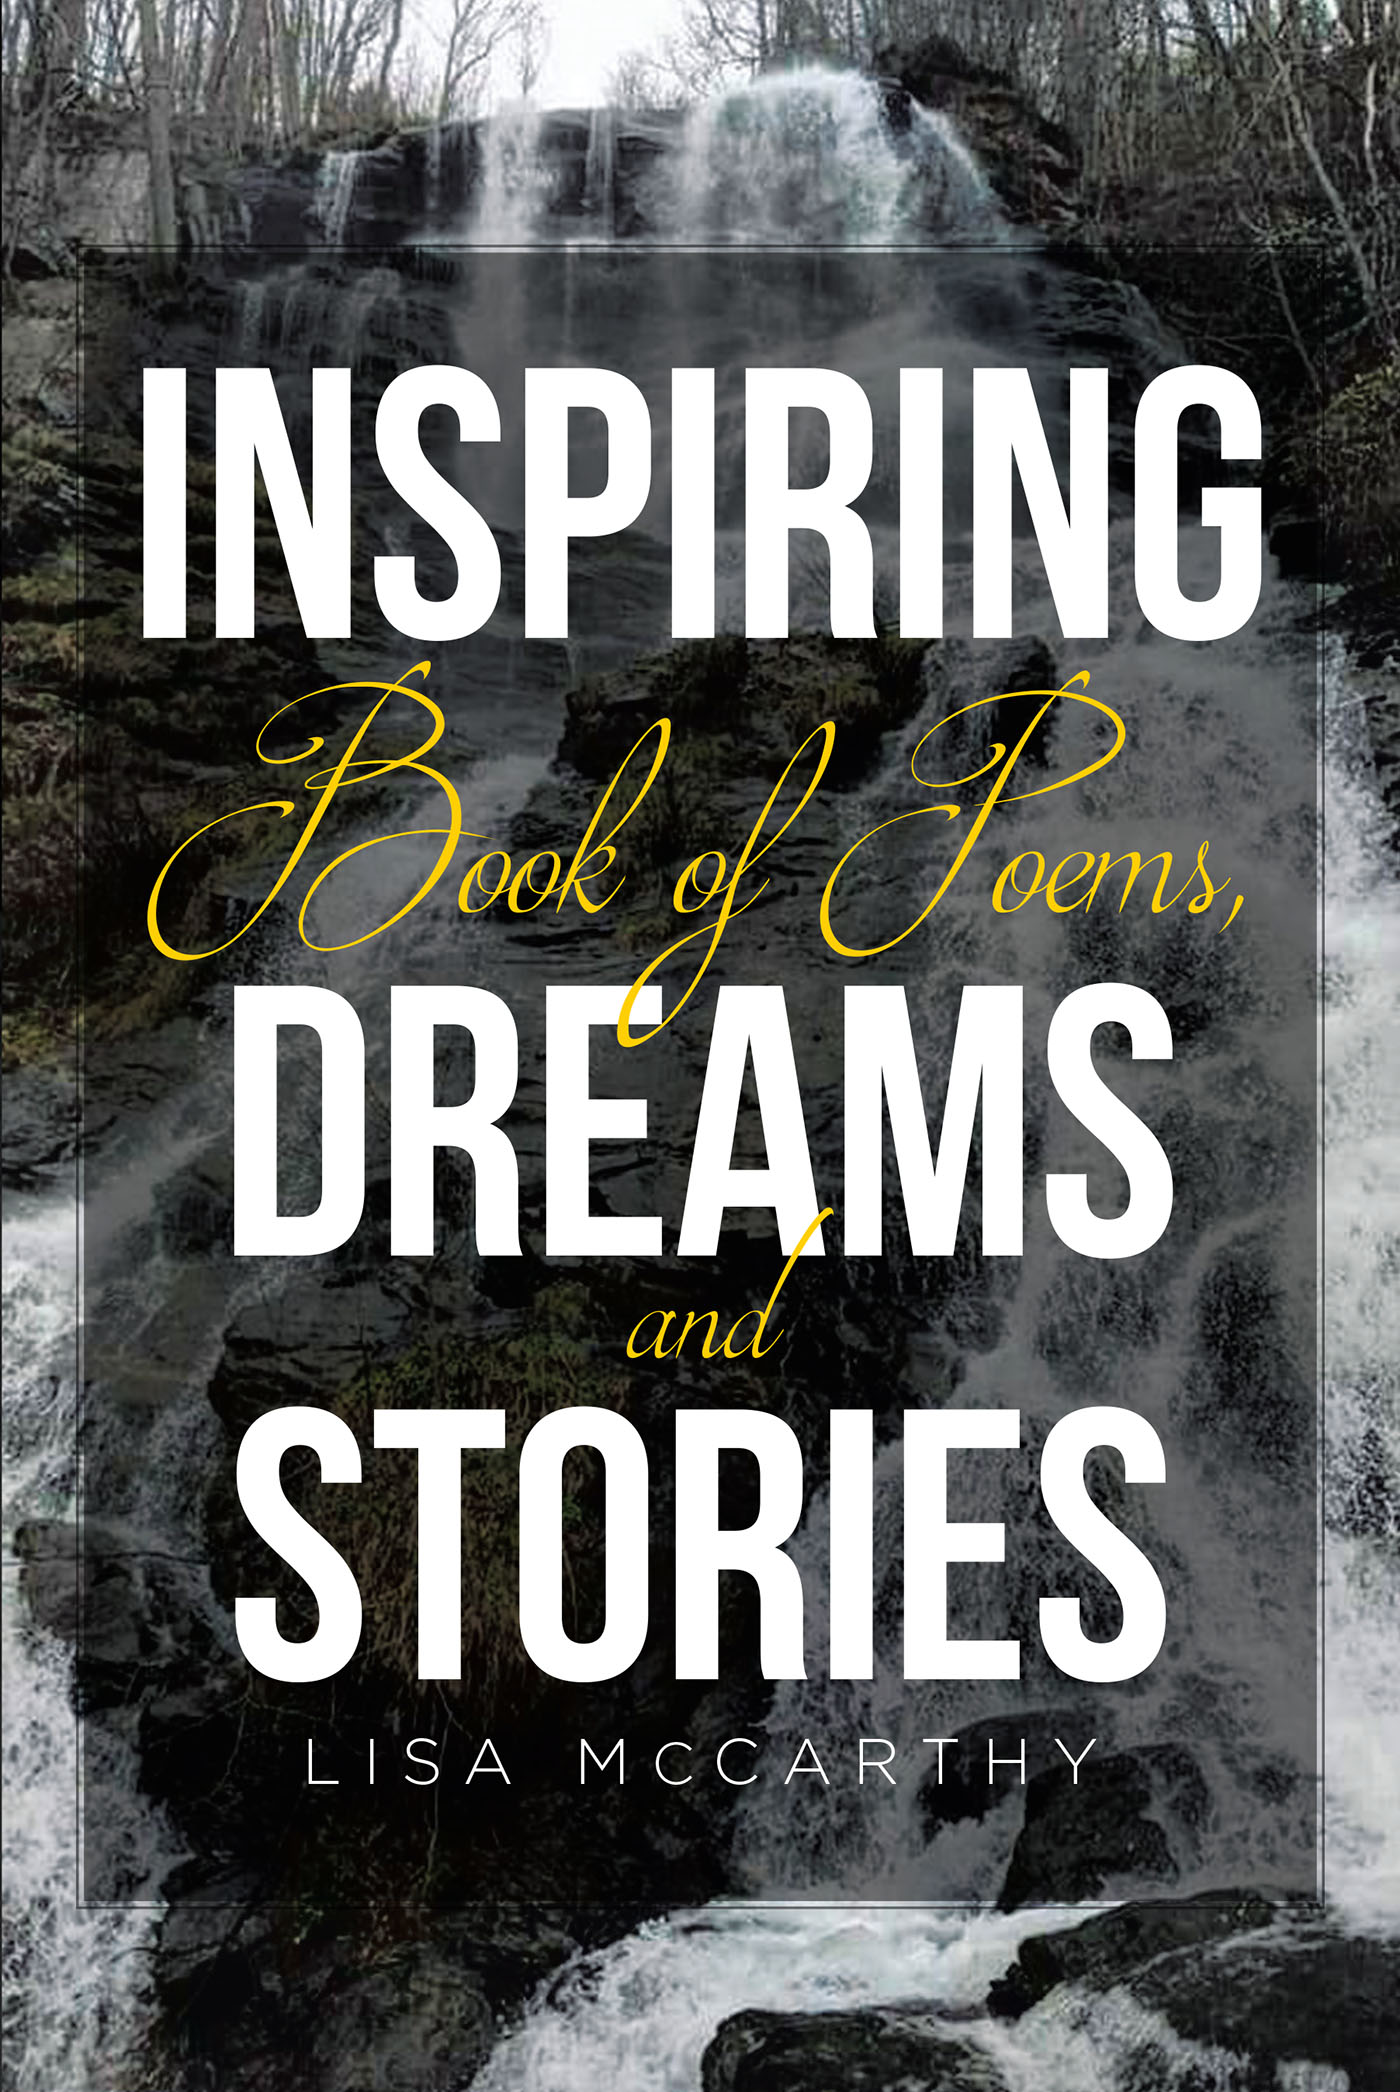 Author Lisa McCarthy’s New Book, "Inspiring Book of Poems, Dreams, and Stories," Shares the Author's Story of Seeking Out God to Face Her Trials and Transform Her Life